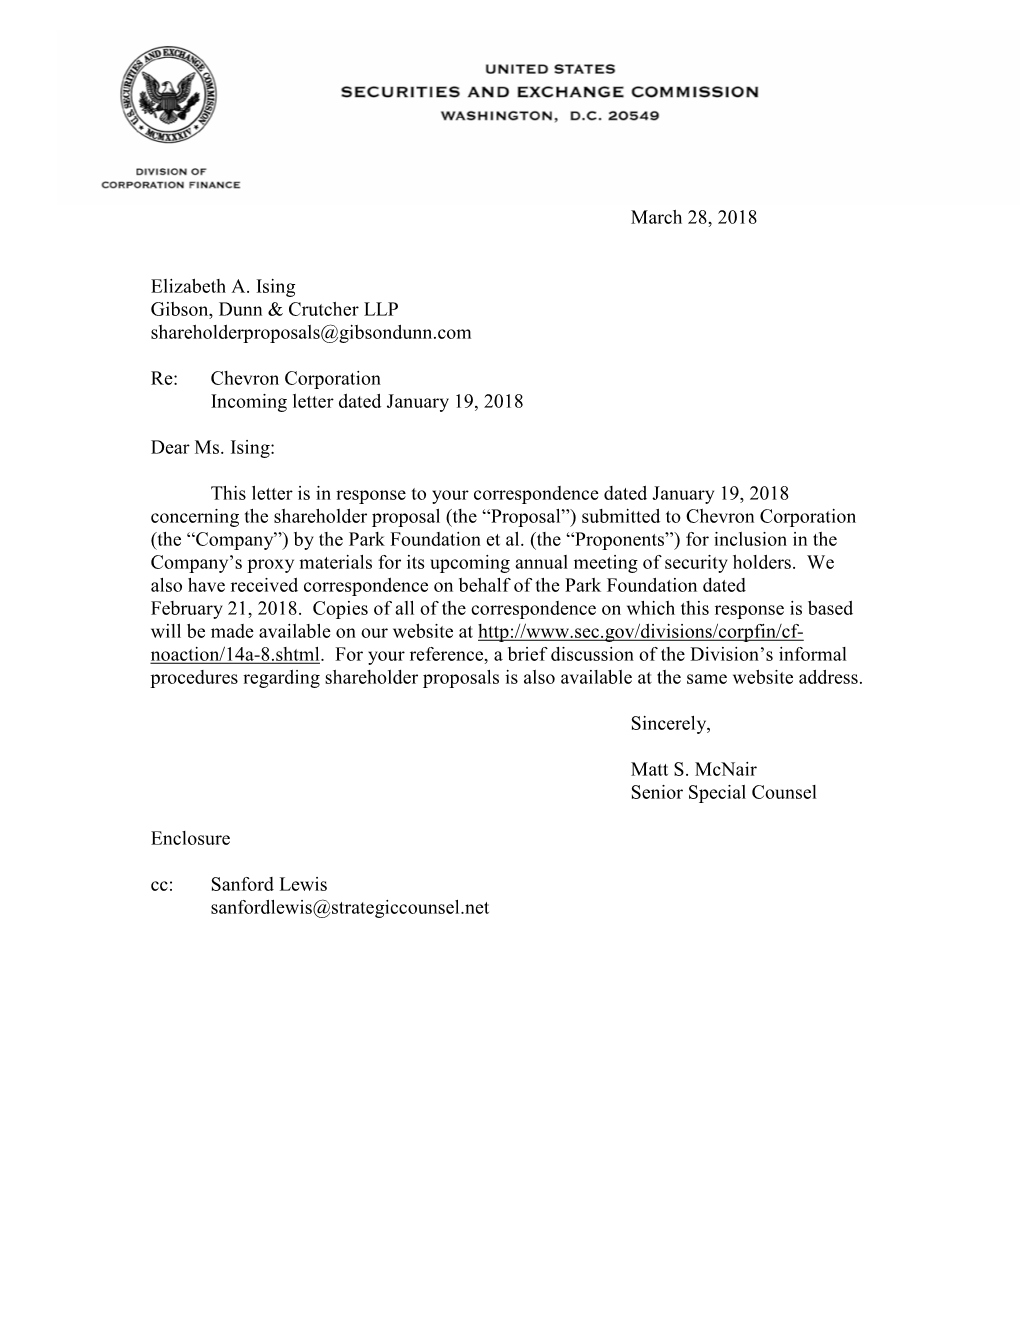 Chevron Corporation Incoming Letter Dated January 19, 2018